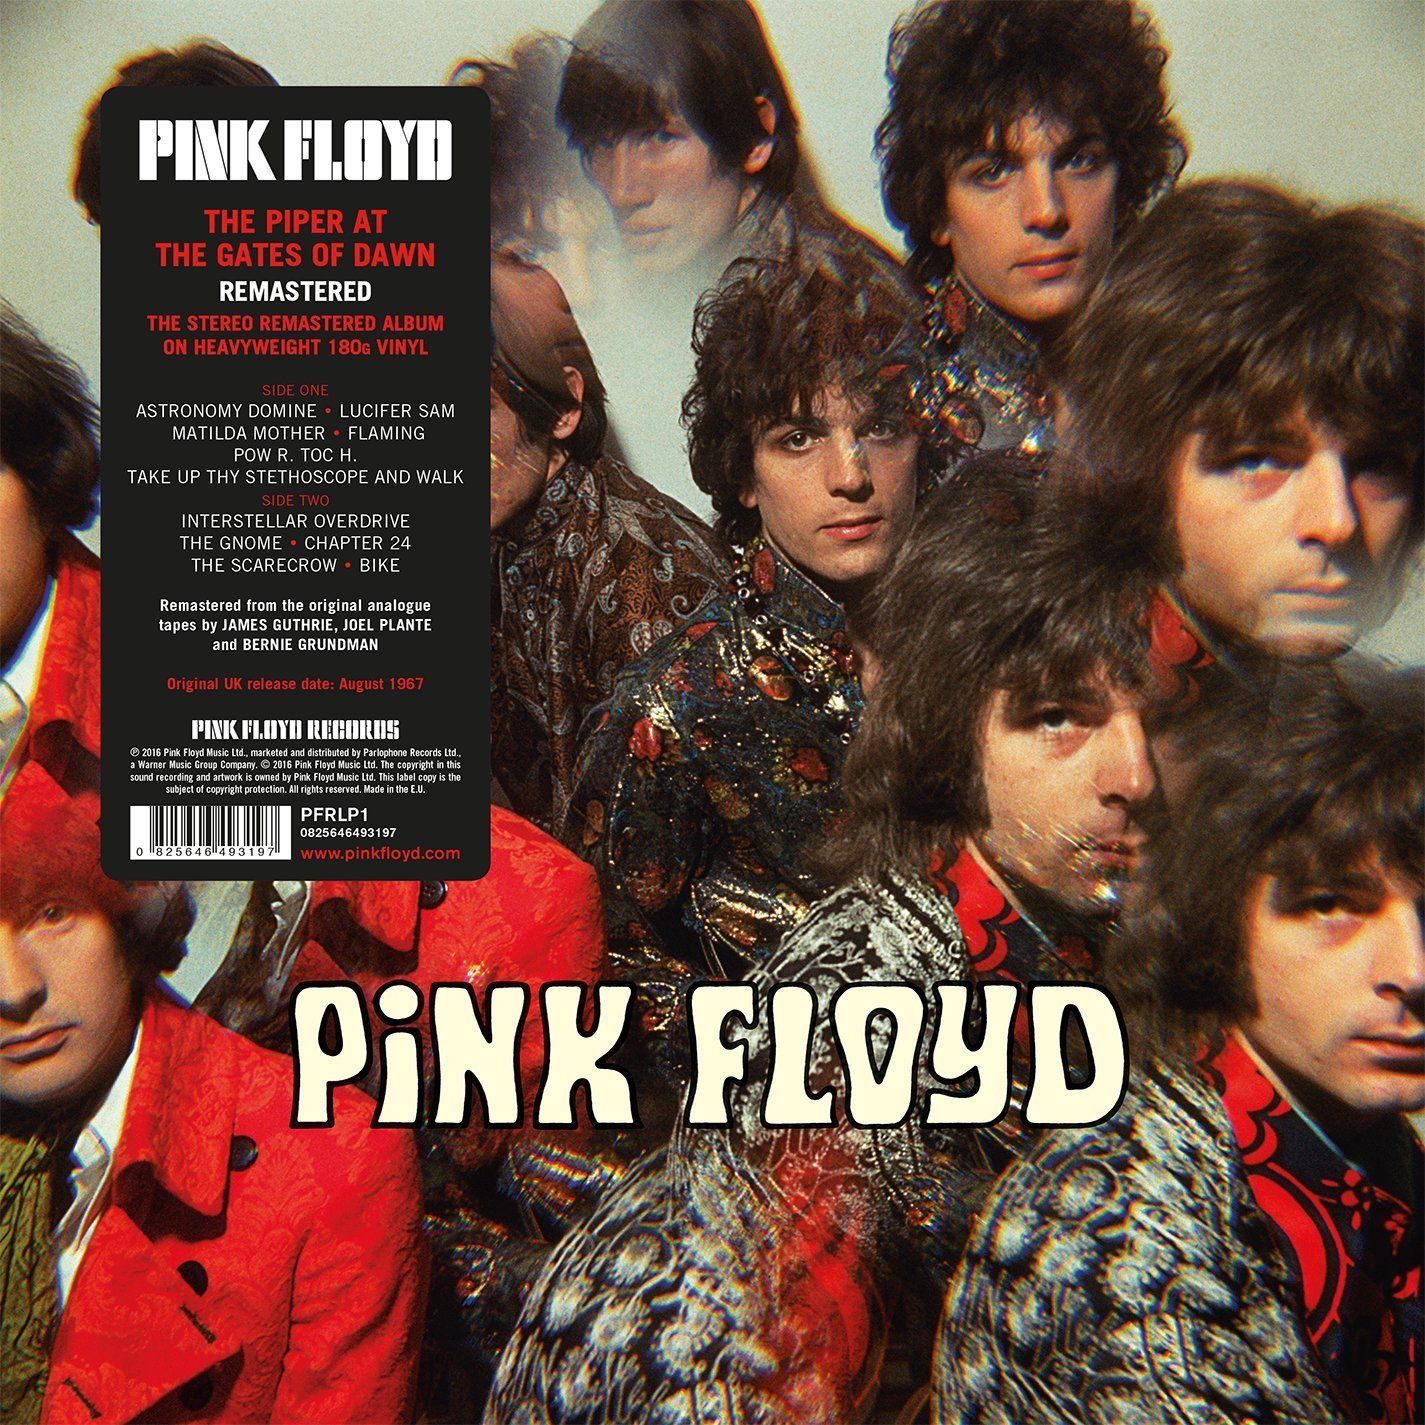 Pink Floyd - The Piper At The Gates Of Dawn (PFRLP1)